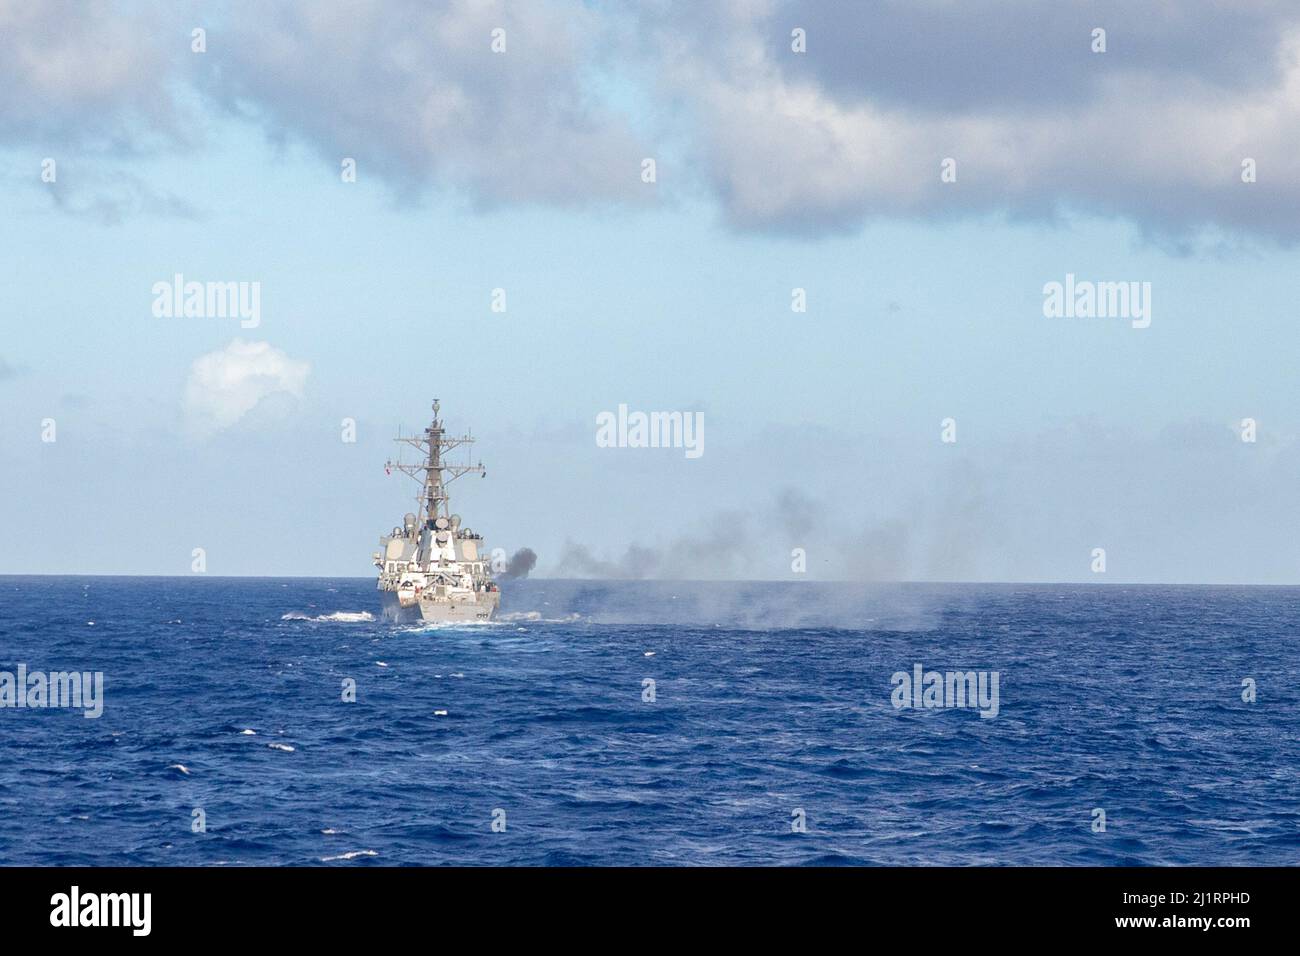 220320-N-KW492-1139 PHILIPPINE SEA (March 20, 2022) The Arleigh Burke-class guided-missile destroyer USS Higgins (DDG 76) fires a 5-inch gun during a live-fire exercise. Higgins is assigned to Destroyer Squadron (DESRON) 15, Navy’s largest forward-deployed DESRON and the U.S. 7th Fleet’s principal fighting force, and is underway supporting a free and open Indo-Pacific. (U.S. Navy photo by Mass Communication Specialist 2nd Class Ryre Arciaga) Stock Photo